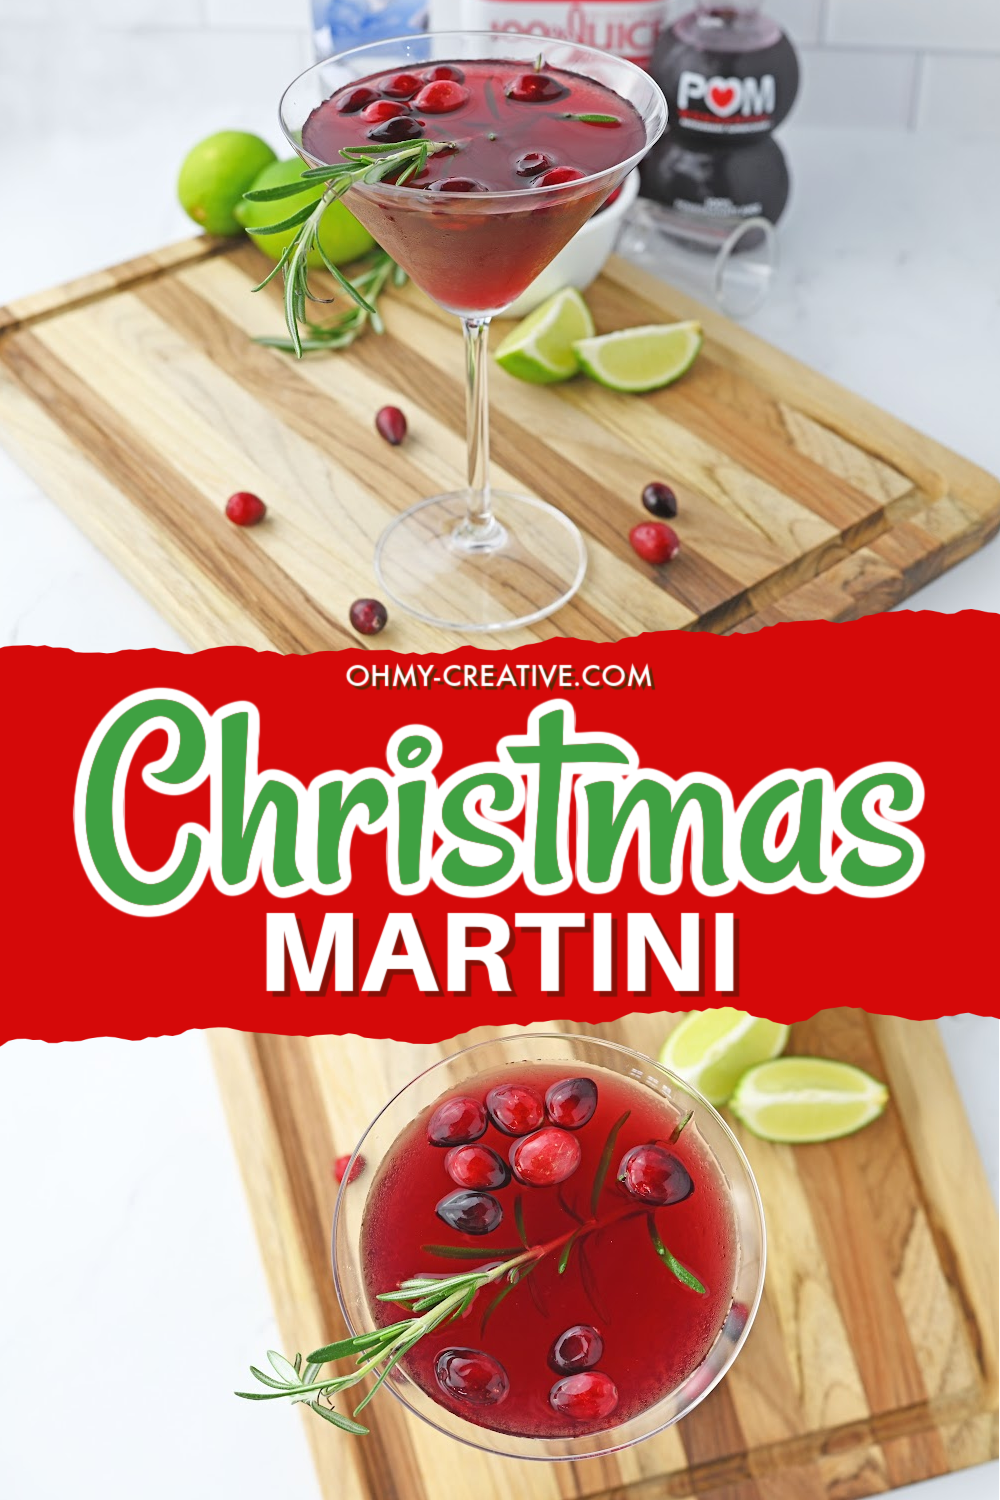 delightful Christmas Martini cocktail recipe garnished with fresh cranberries and a sprig of rosemary. Glass is sitting on a cutting board with slice limes and other ingredients.